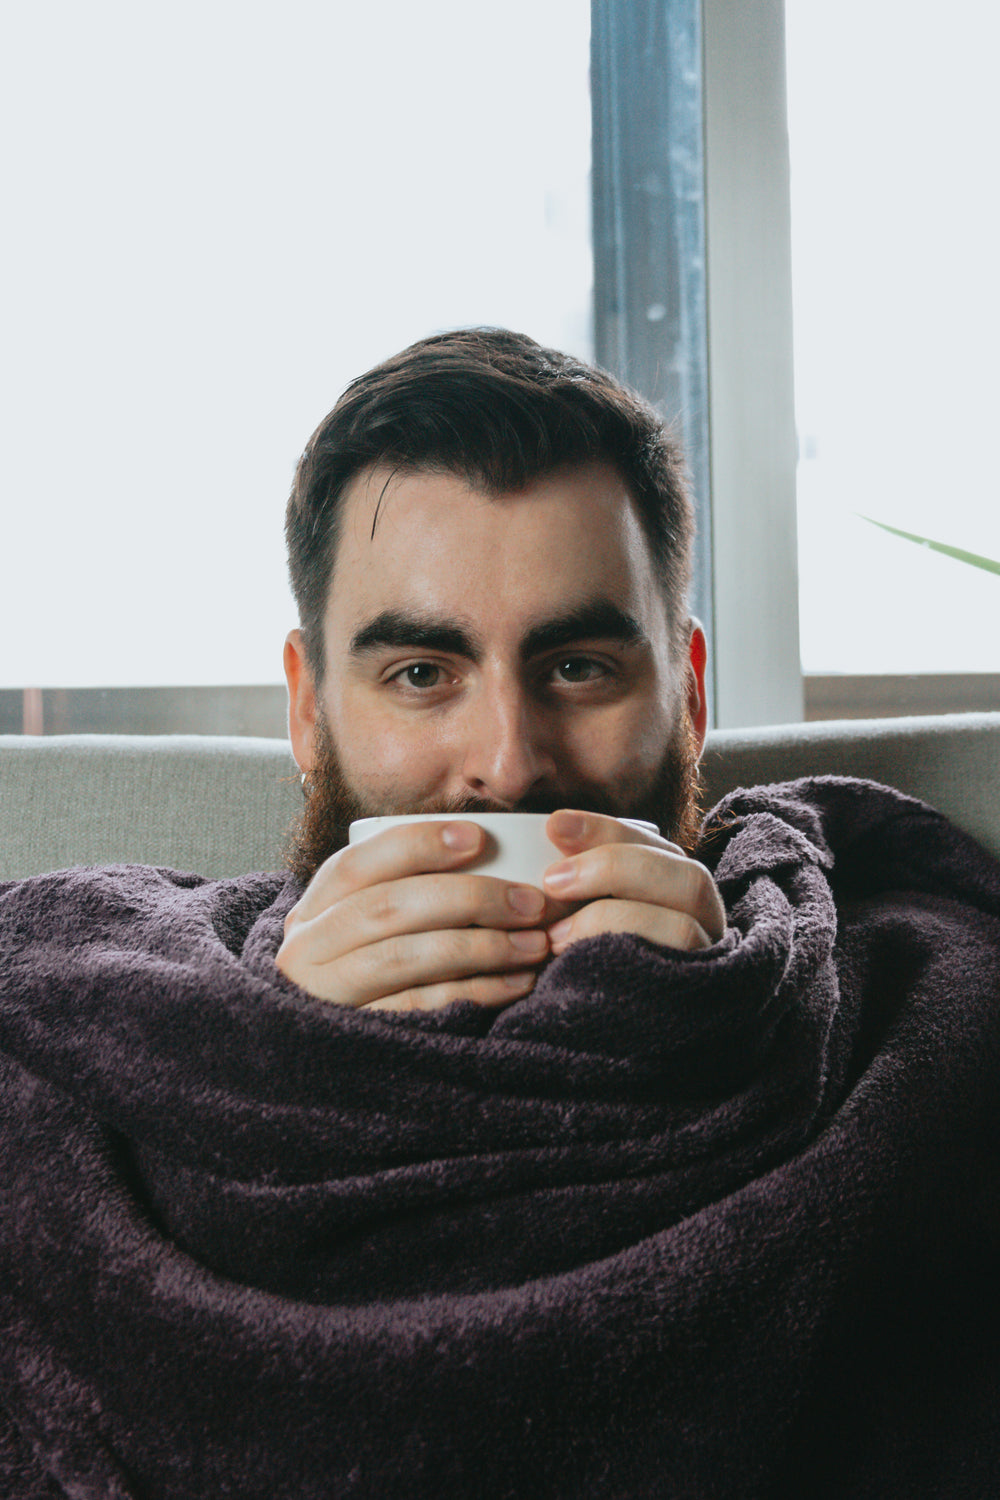 man wrapped in blanket and holding bowl close to his face